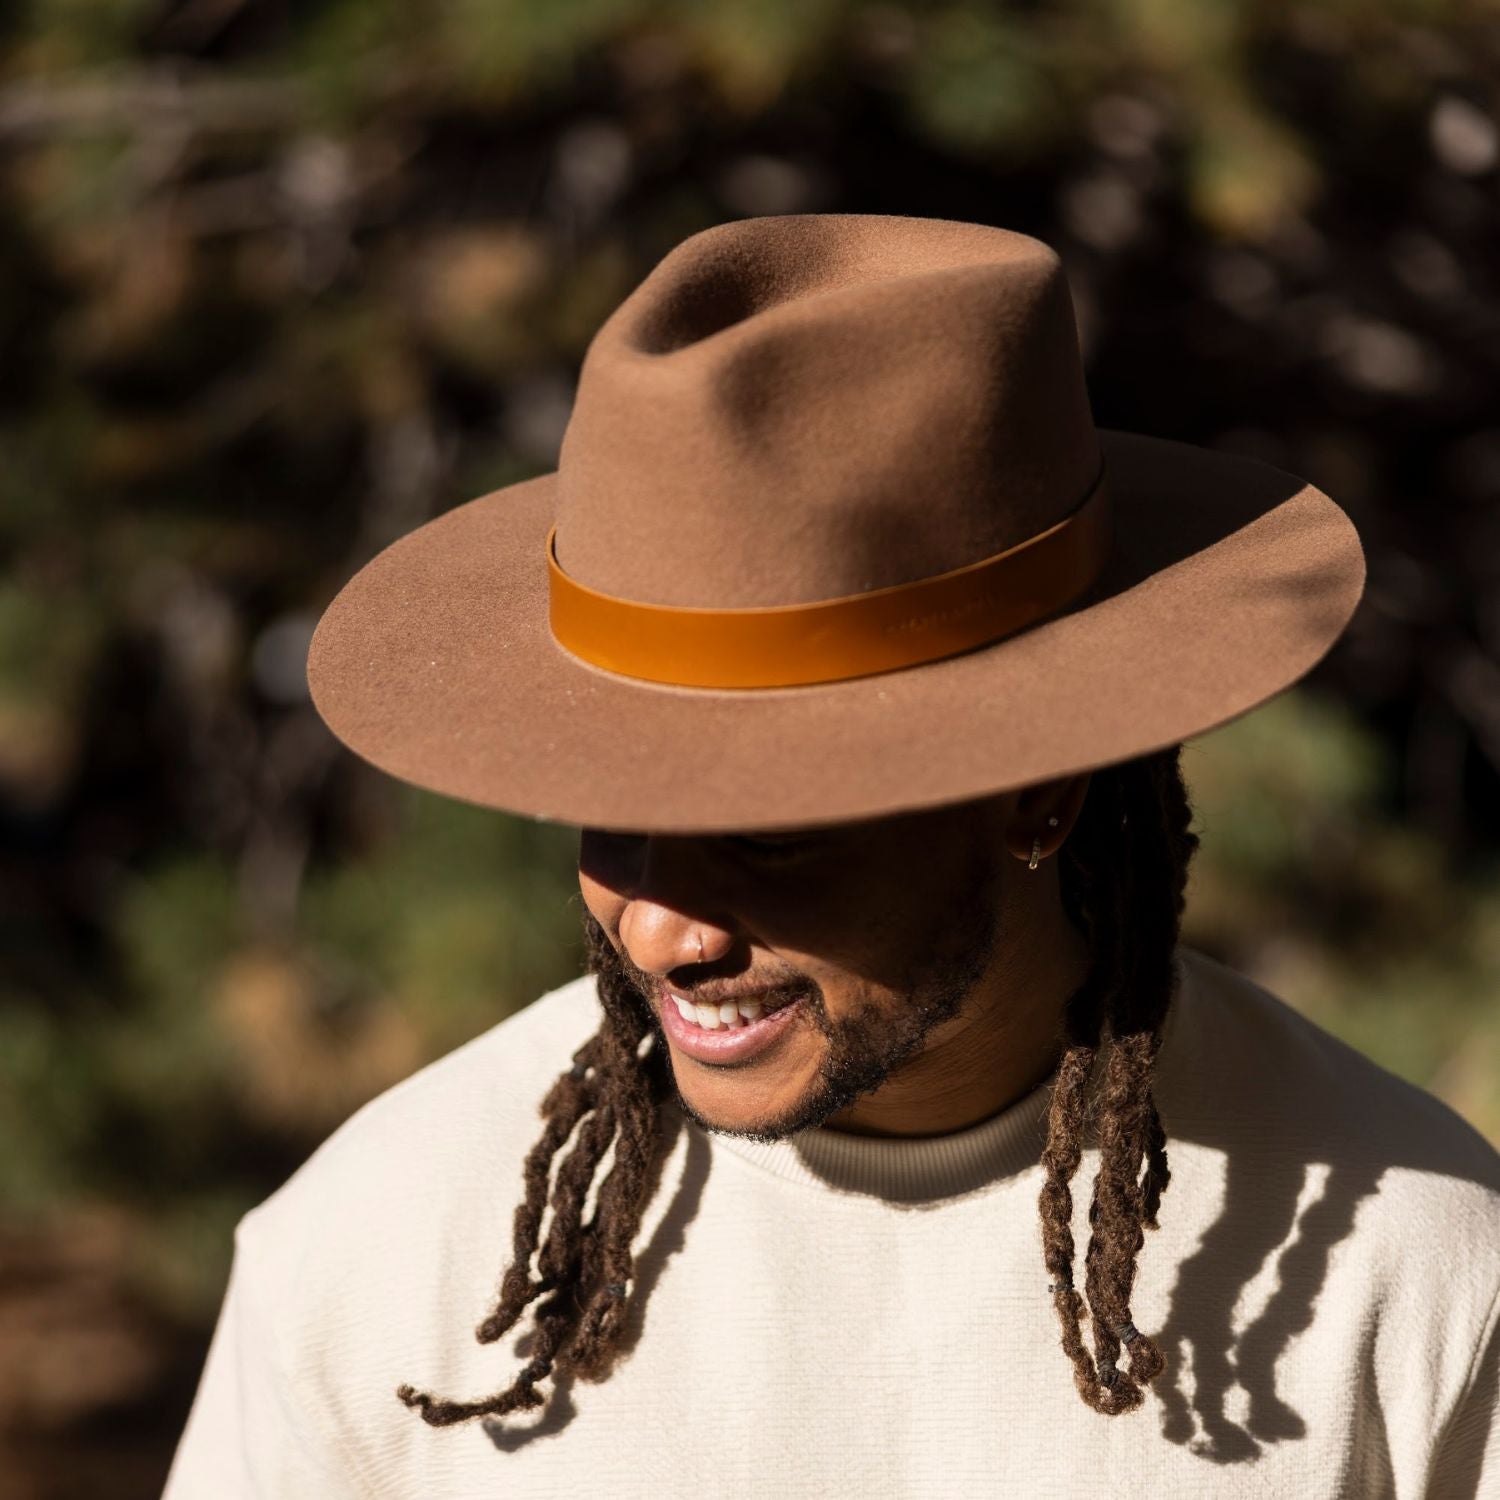 The Great Hat | Russet